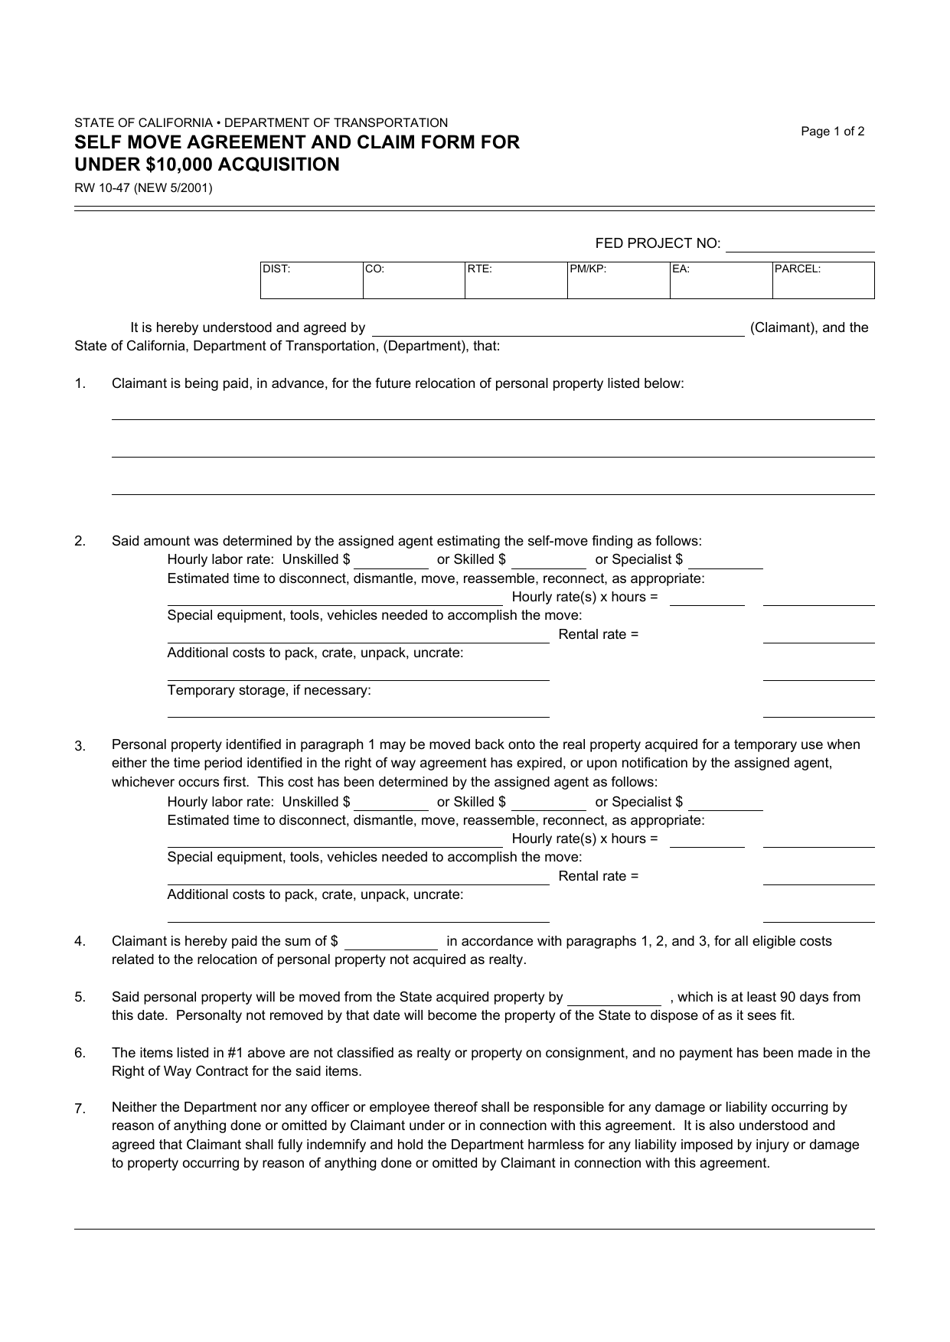 form rw10 47 download fillable pdf or fill online self move agreement and claim form for under 10 000 acquisition california templateroller